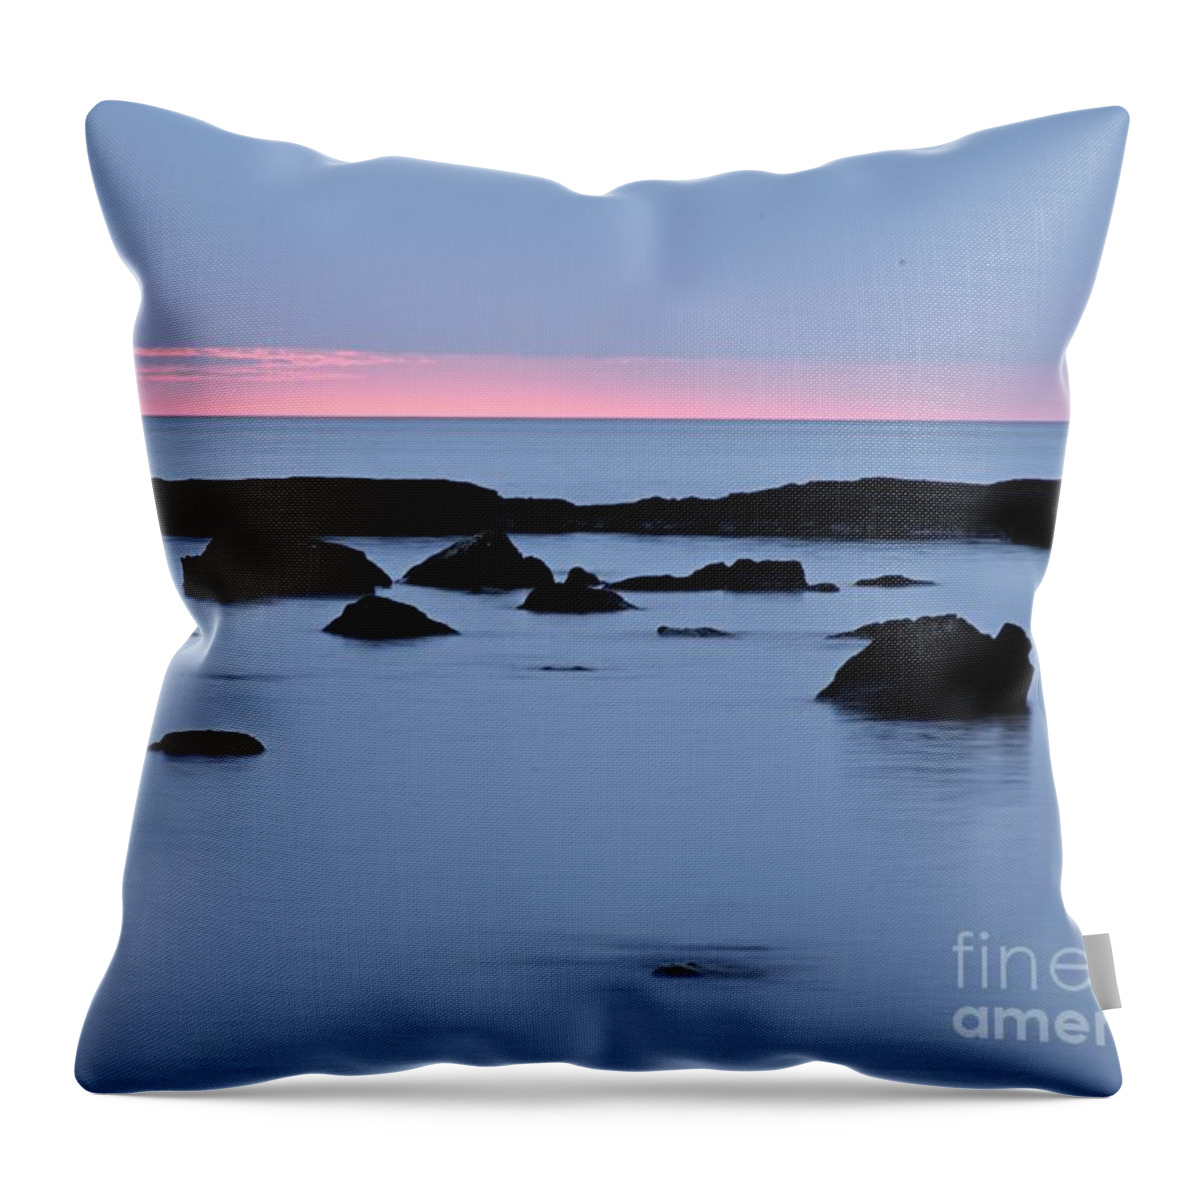 Photography Throw Pillow featuring the photograph Subtle Sunrise by Larry Ricker